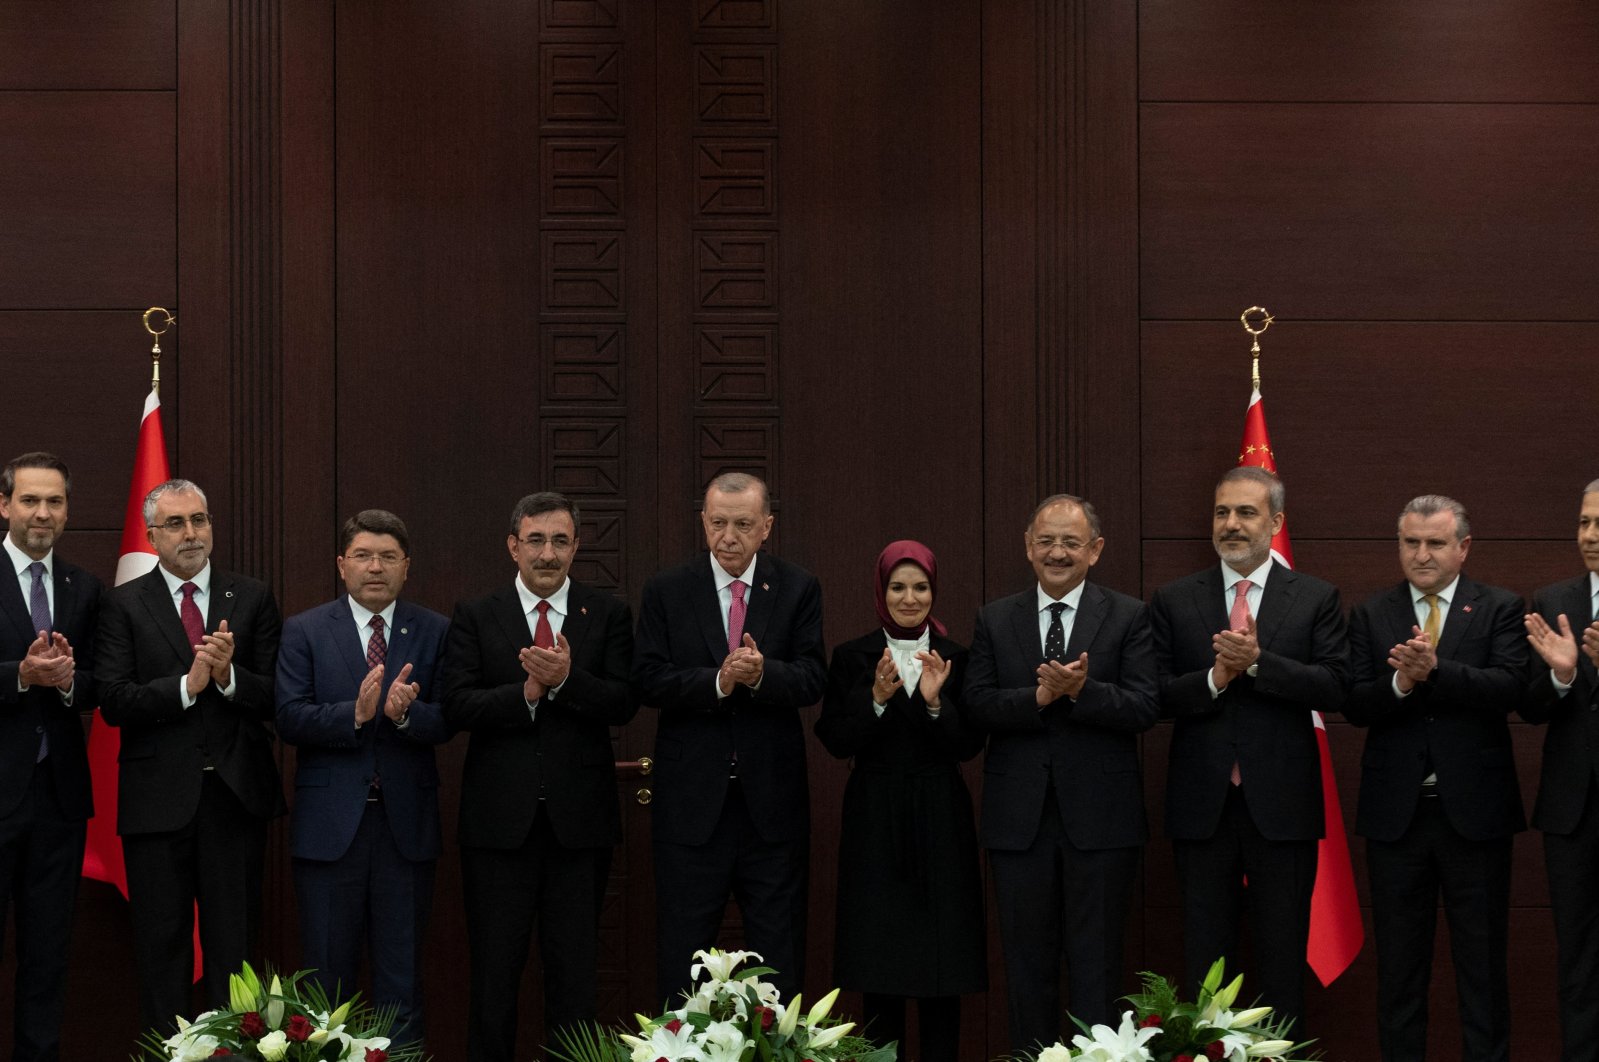 President Recep Tayyip Erdoğan (C) and new ministers applaud after a press conference where he announced the new Cabinet members at the Presidential Complex, Ankara, Türkiye, June 3, 2023. (Reuters Photo)